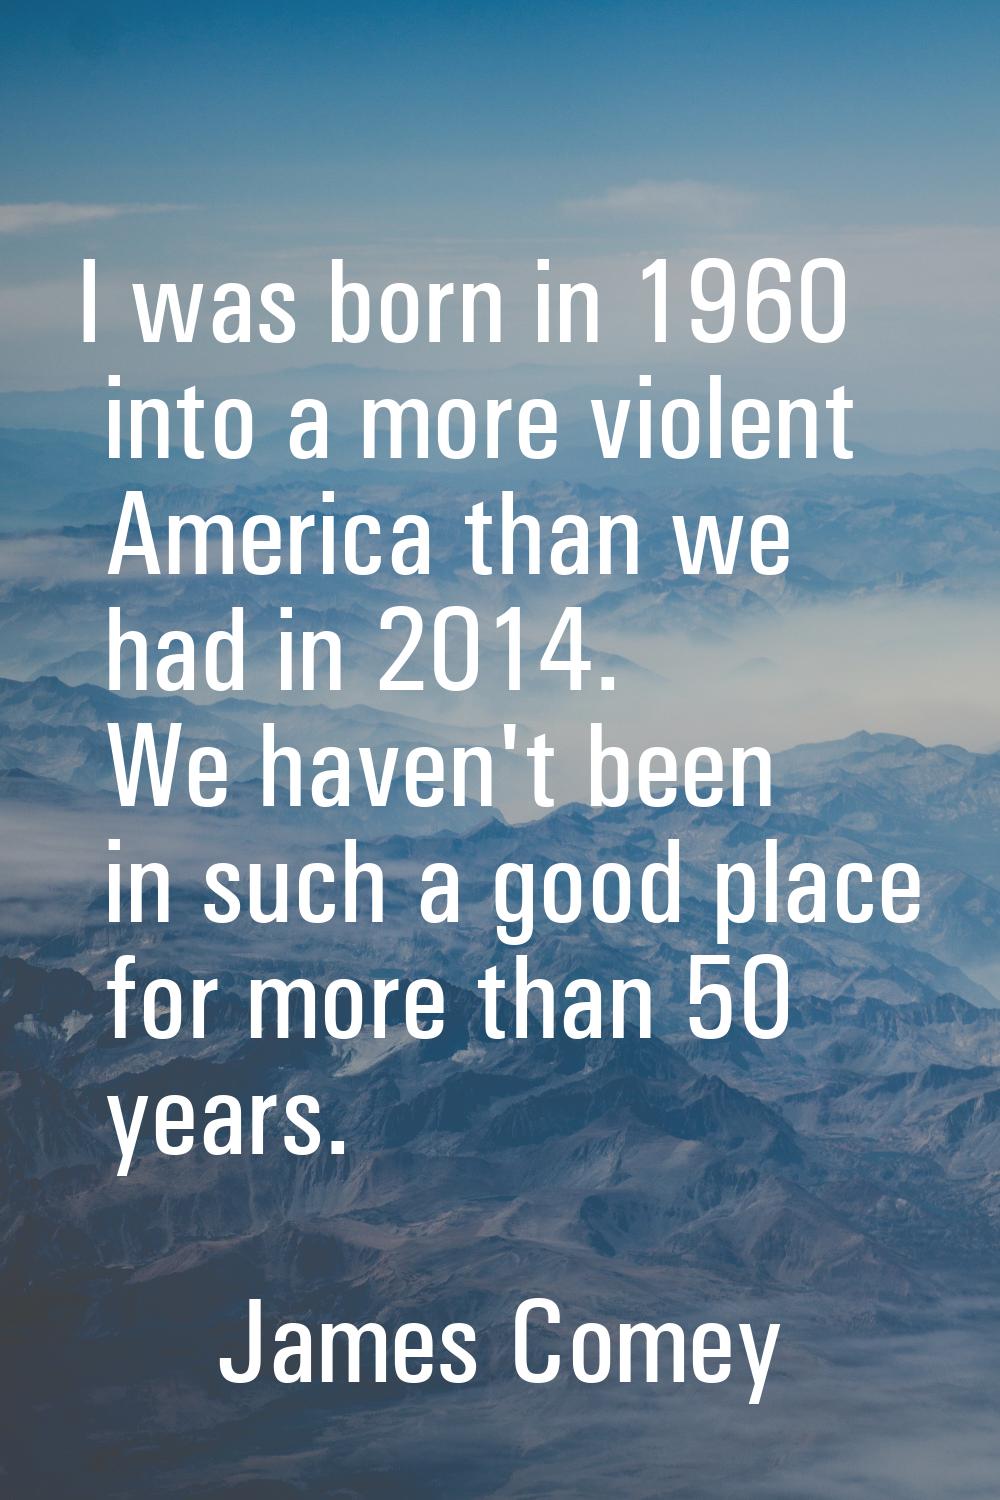 I was born in 1960 into a more violent America than we had in 2014. We haven't been in such a good 